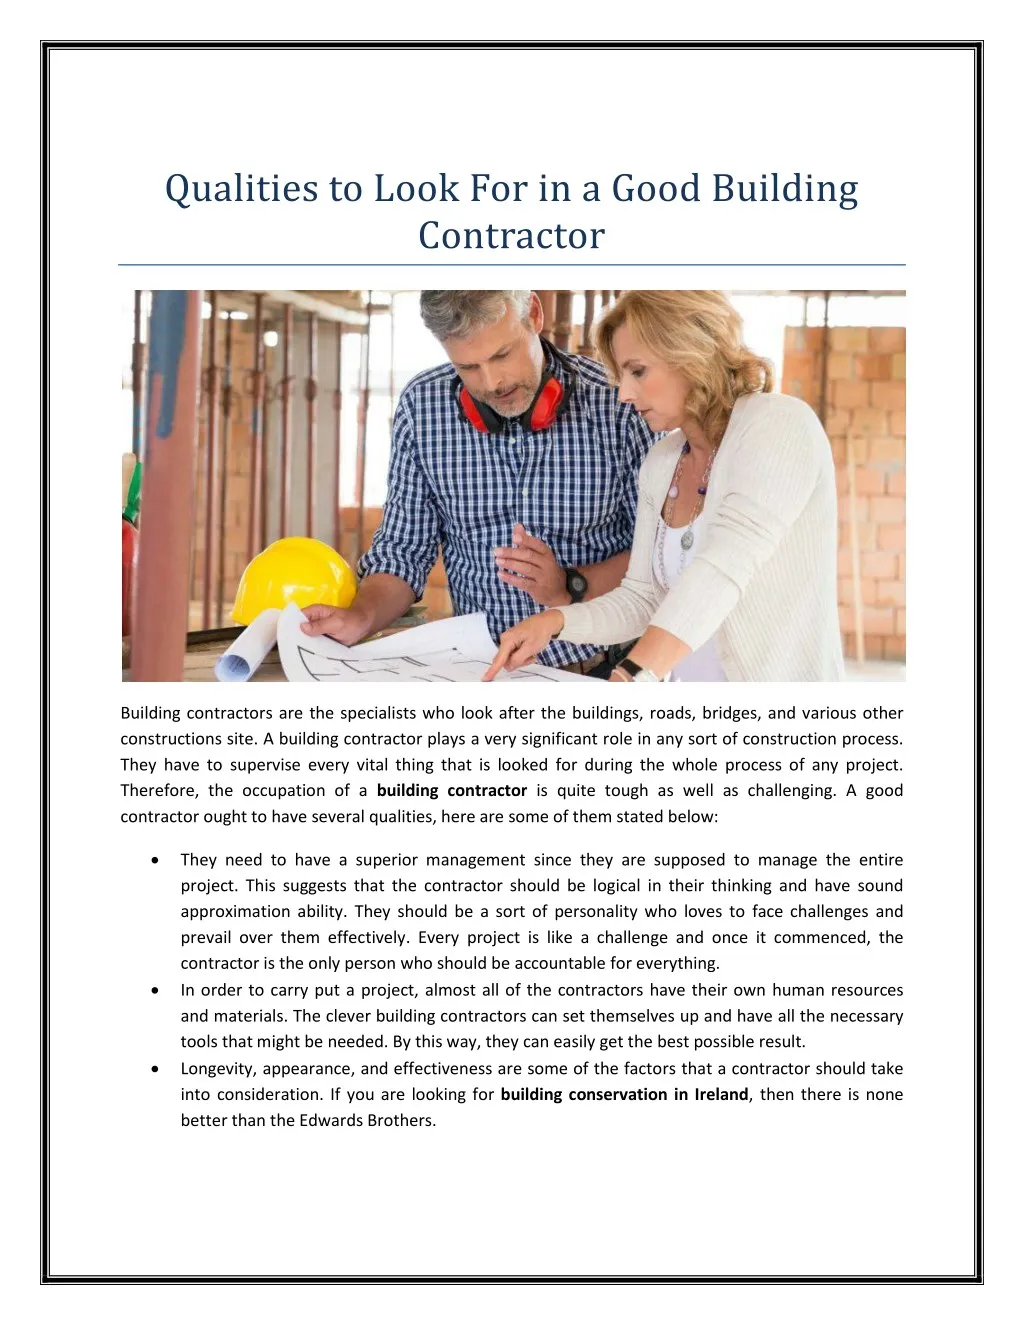 qualities to look for in a good building